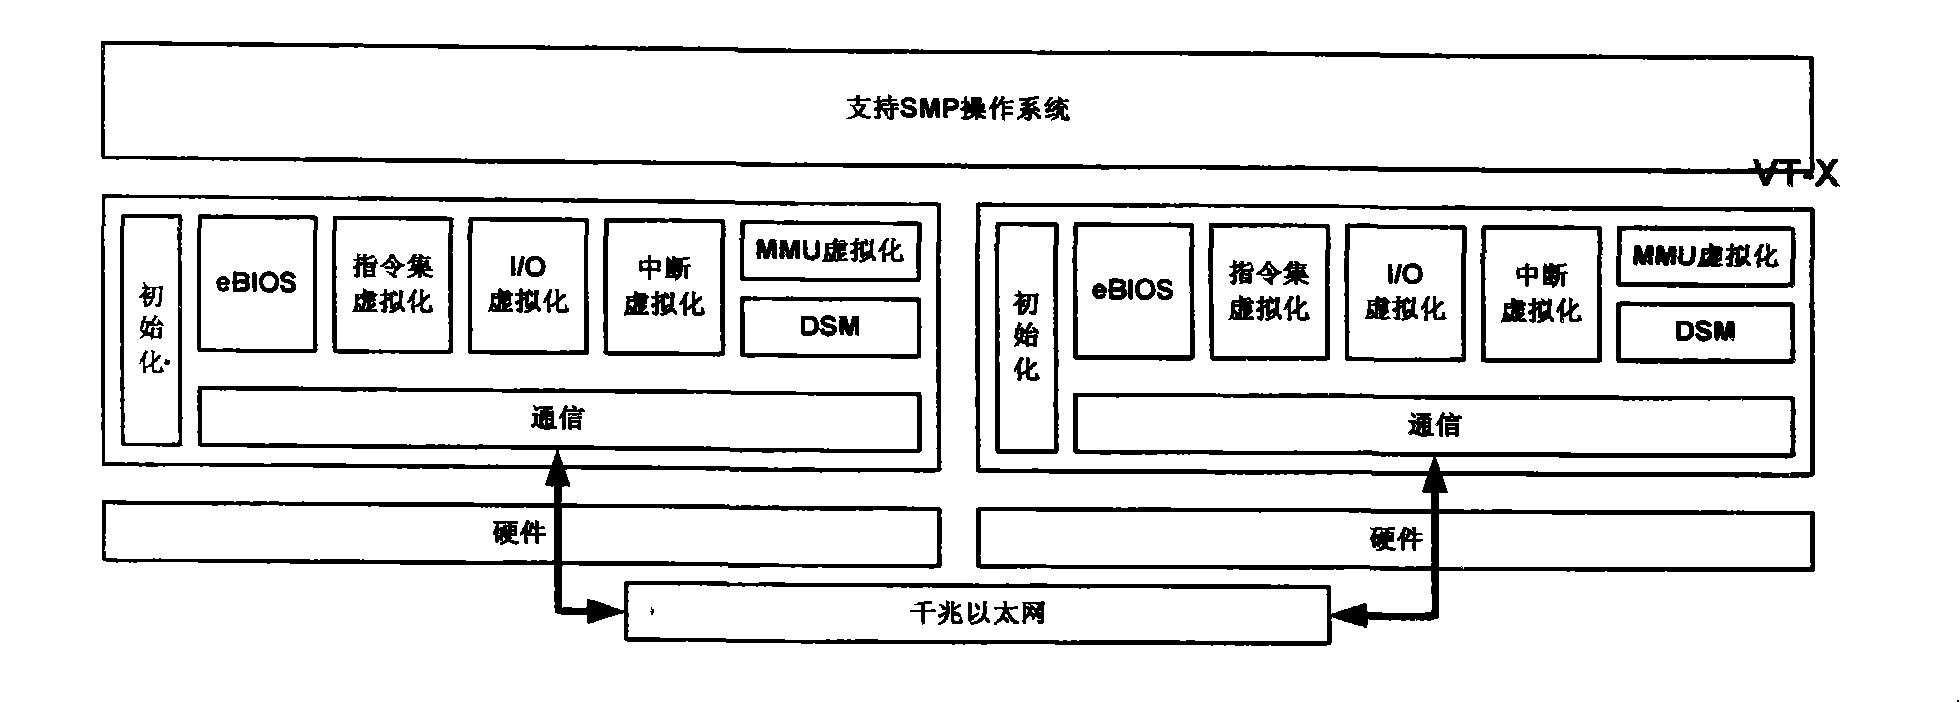 Server cluster unit system with single system image